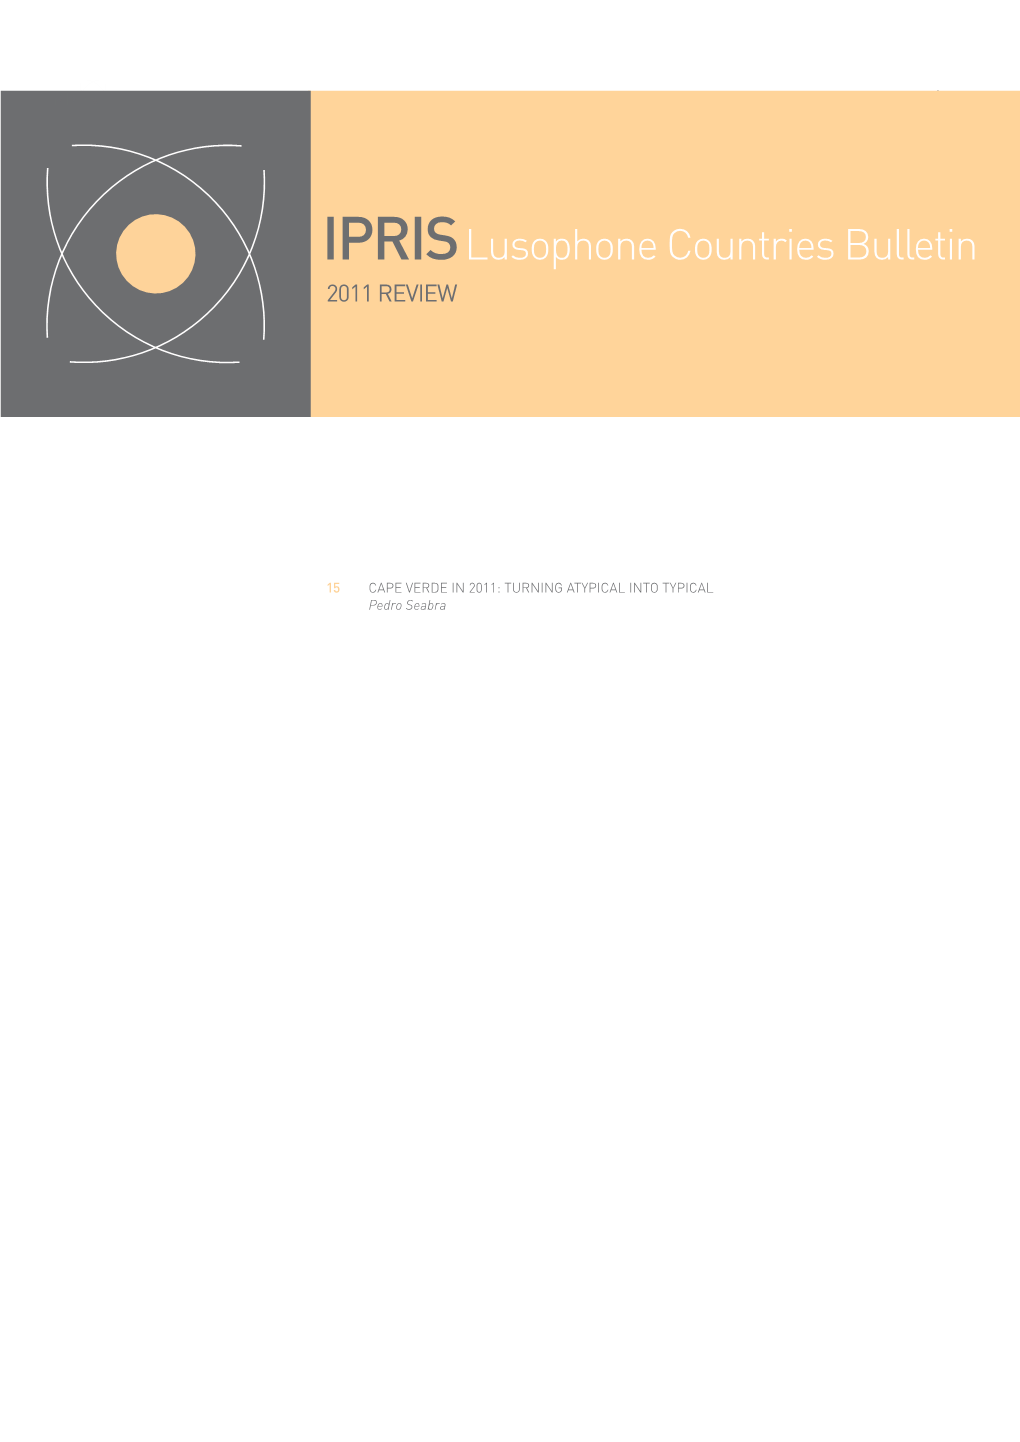 IPRIS Lusophone Countries Bulletin 2011 REVIEW